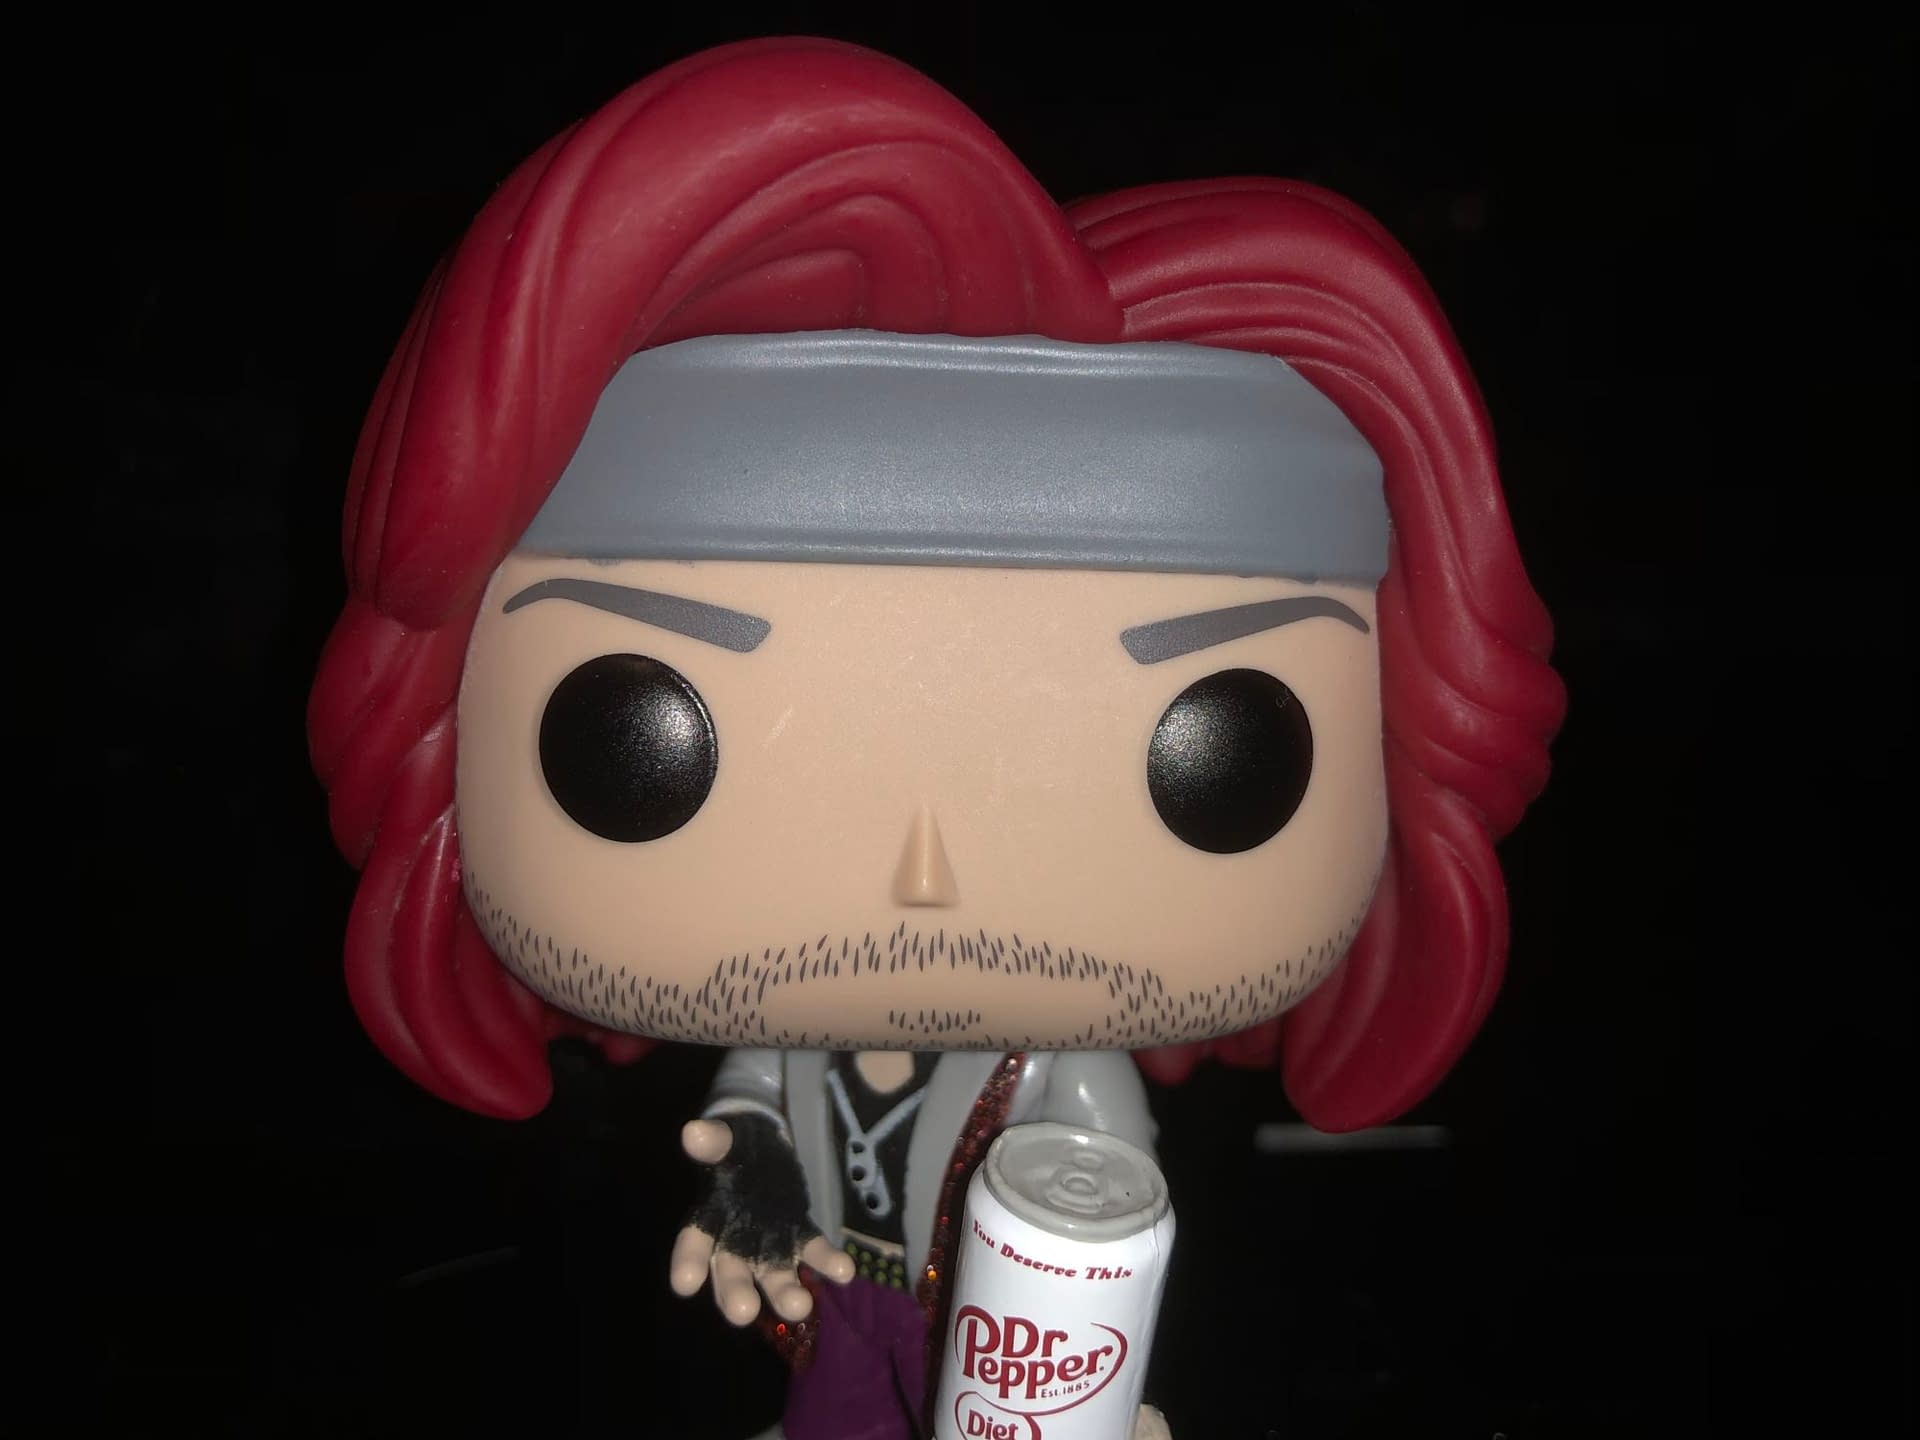 Funko Gets Refreshing With the Dr. Pepper Lil Sweet Pop [Review]